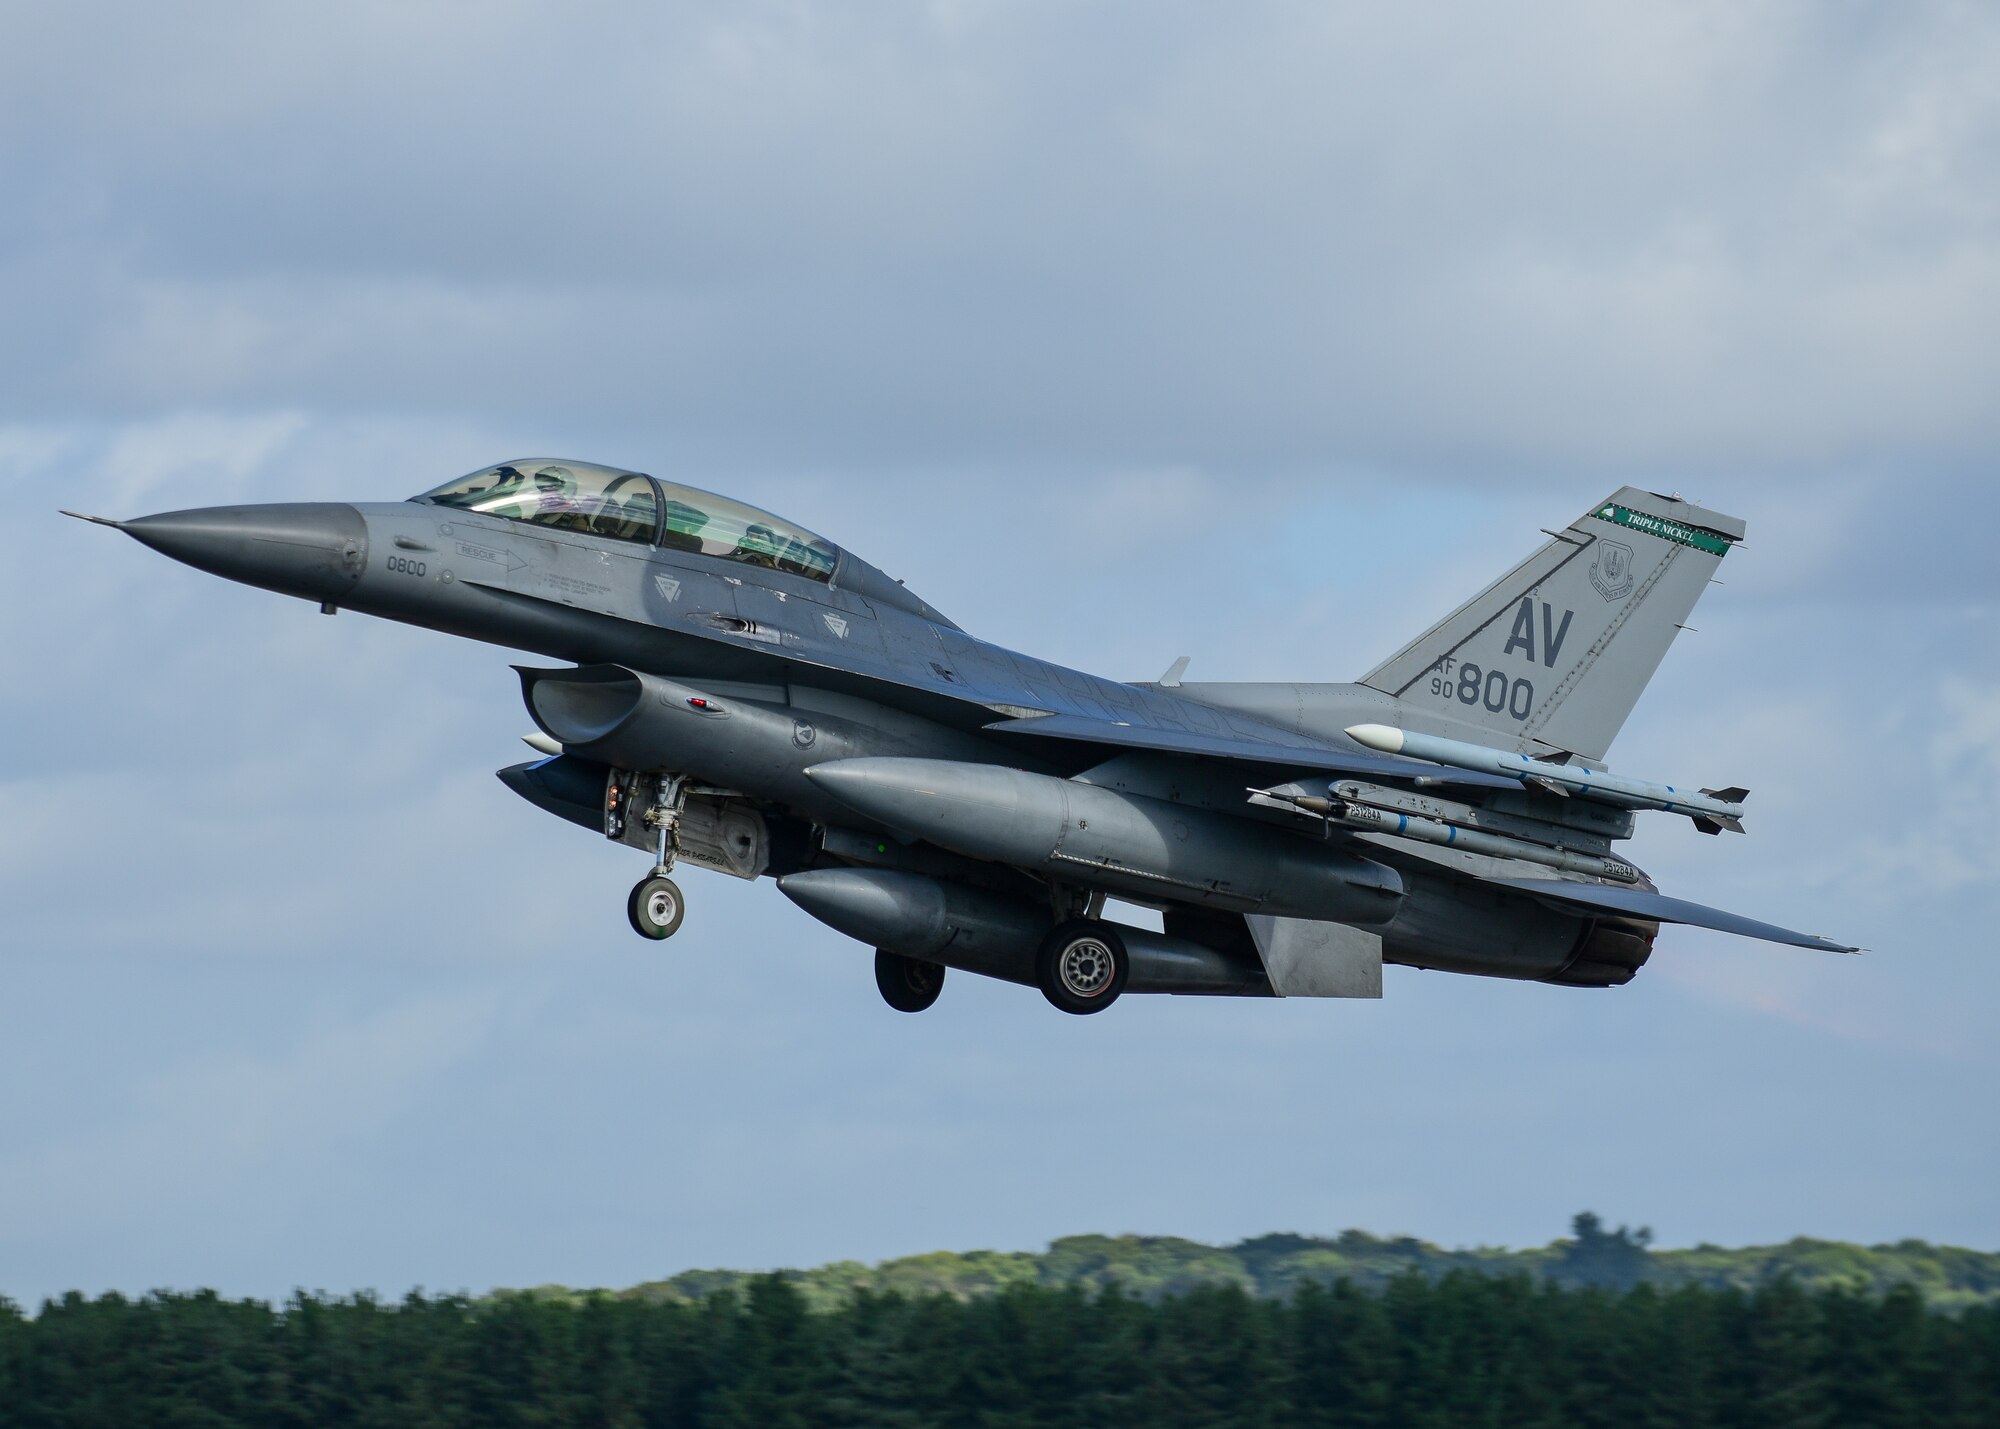 A U.S. Air Force F-16C Fighting Falcon assigned to the 555th Fighter Squadron from the 31st Fighter Wing, Aviano Air Base, Italy, takes off